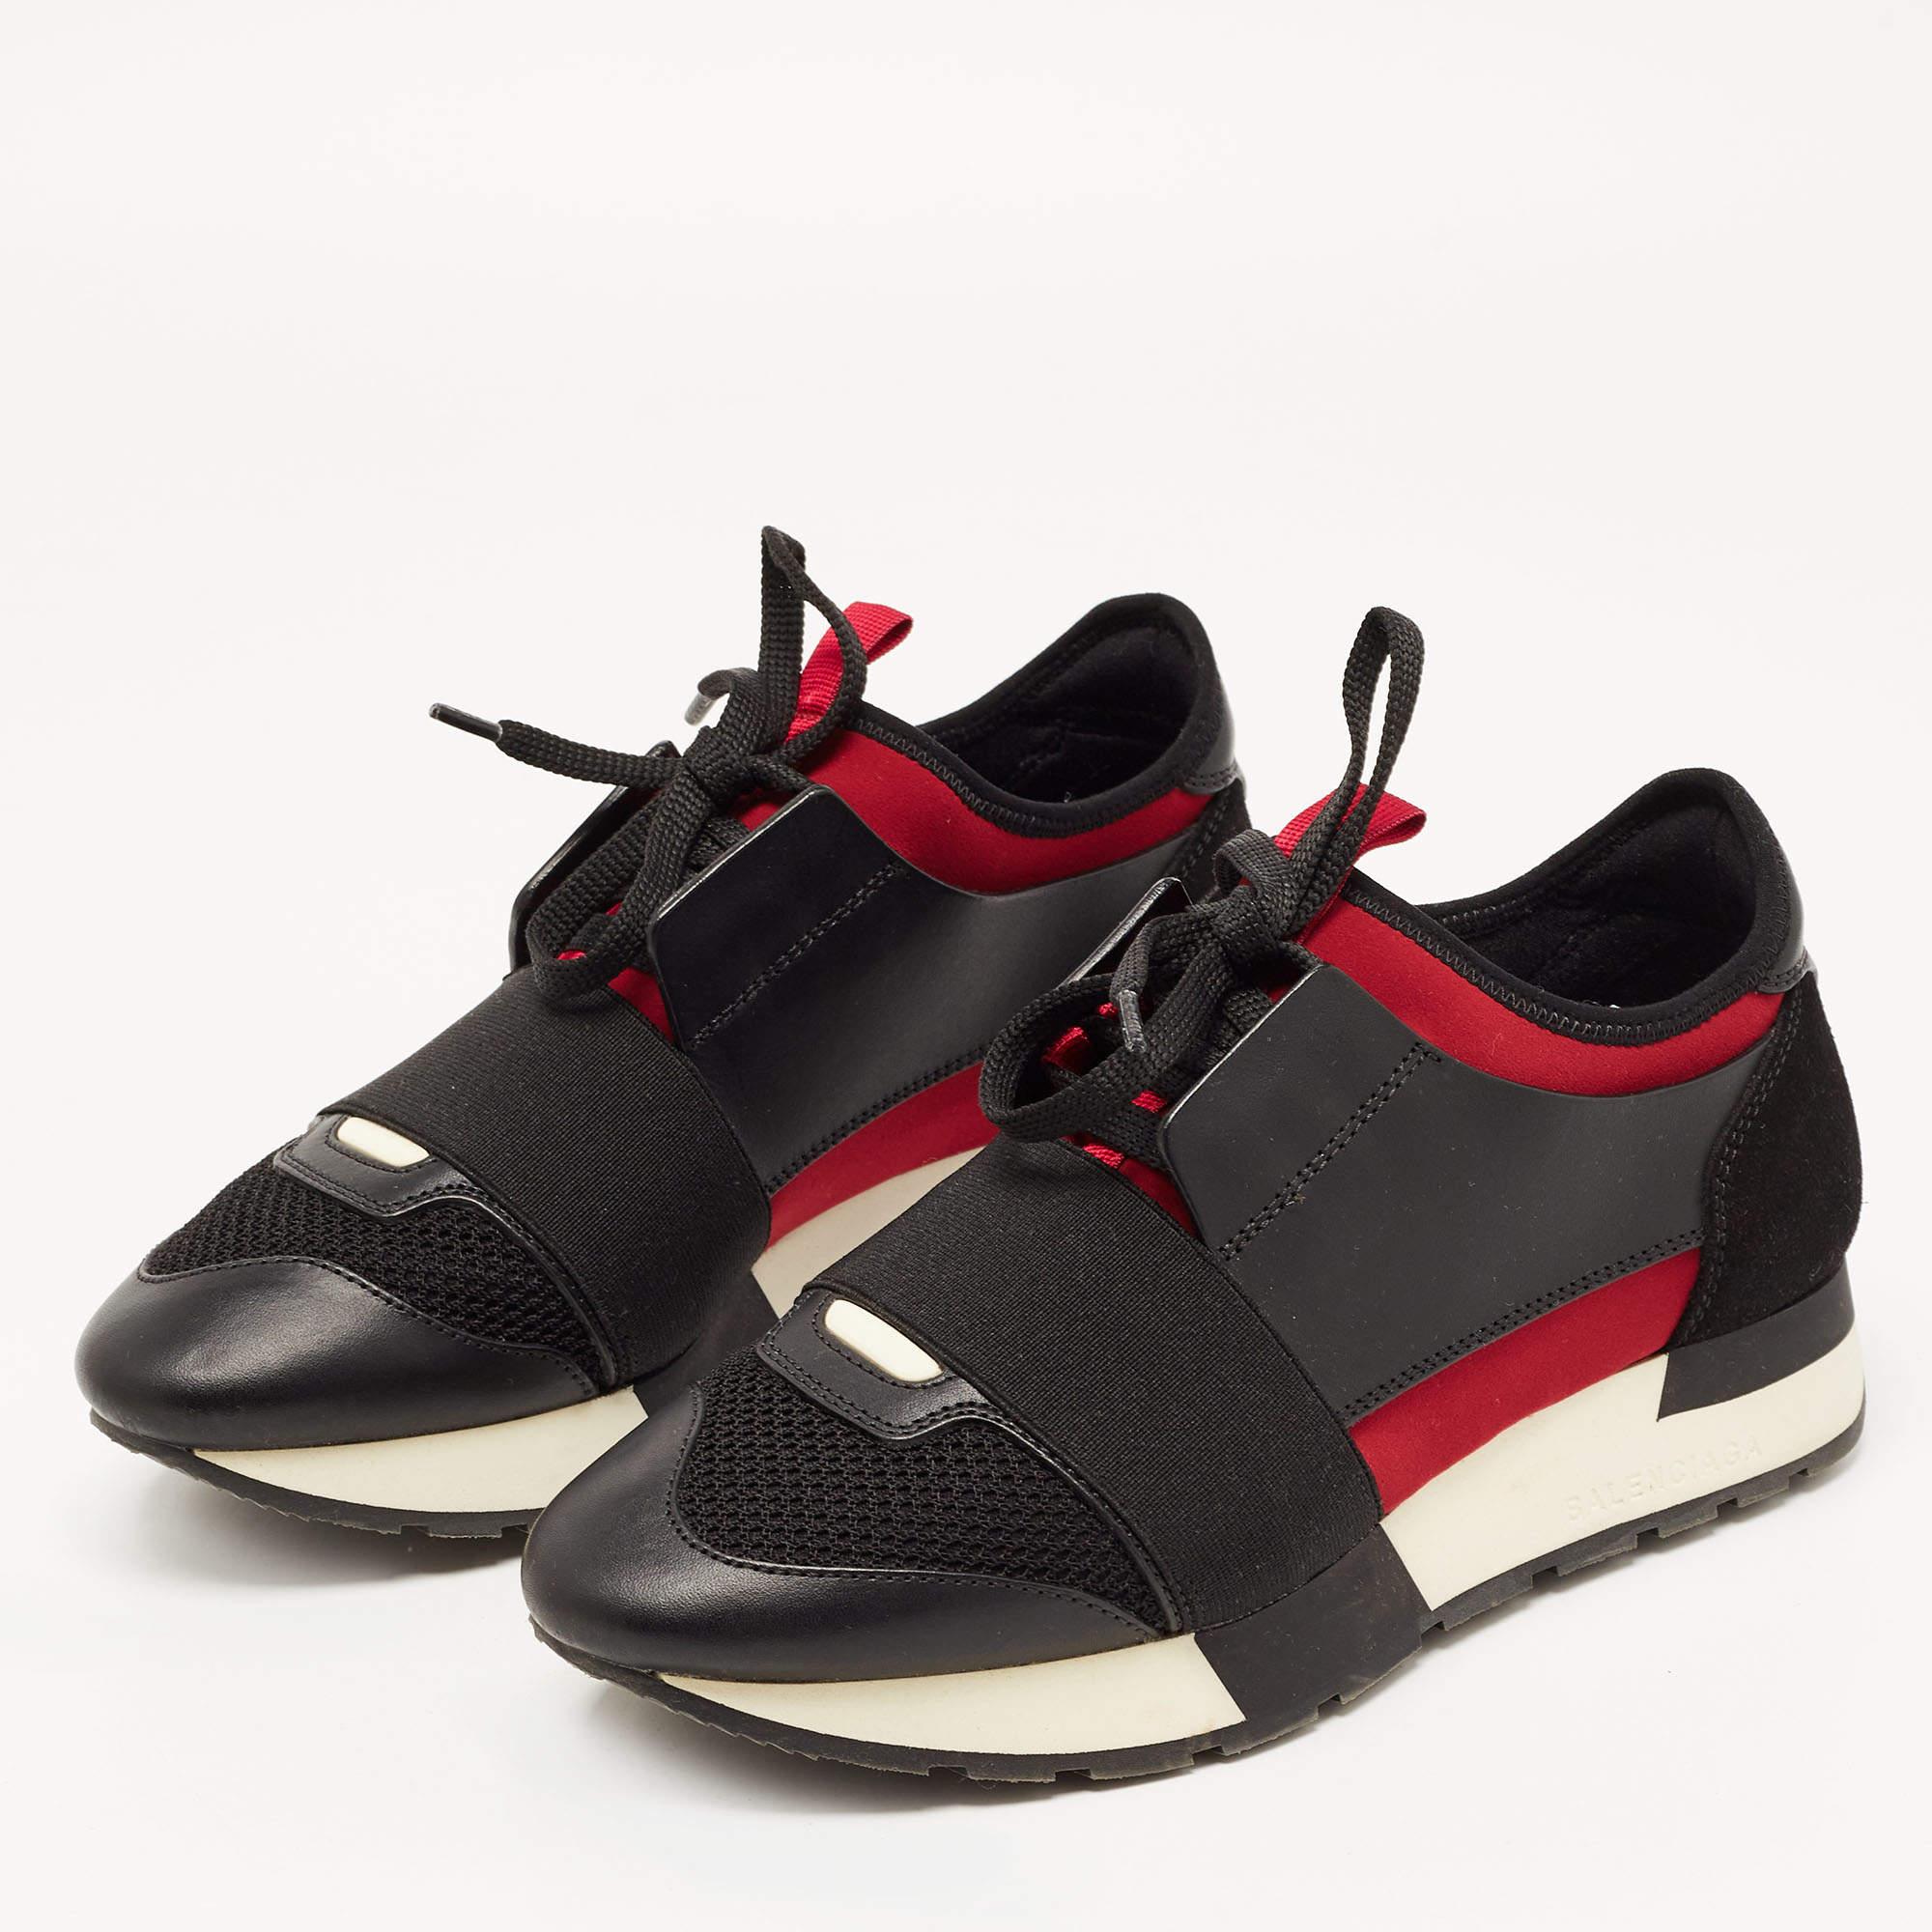 Coming in a classic silhouette, these designer sneakers are a seamless combination of luxury, comfort, and style. These sneakers are finished with signature details and comfortable insoles.

Includes: Original Dustbag